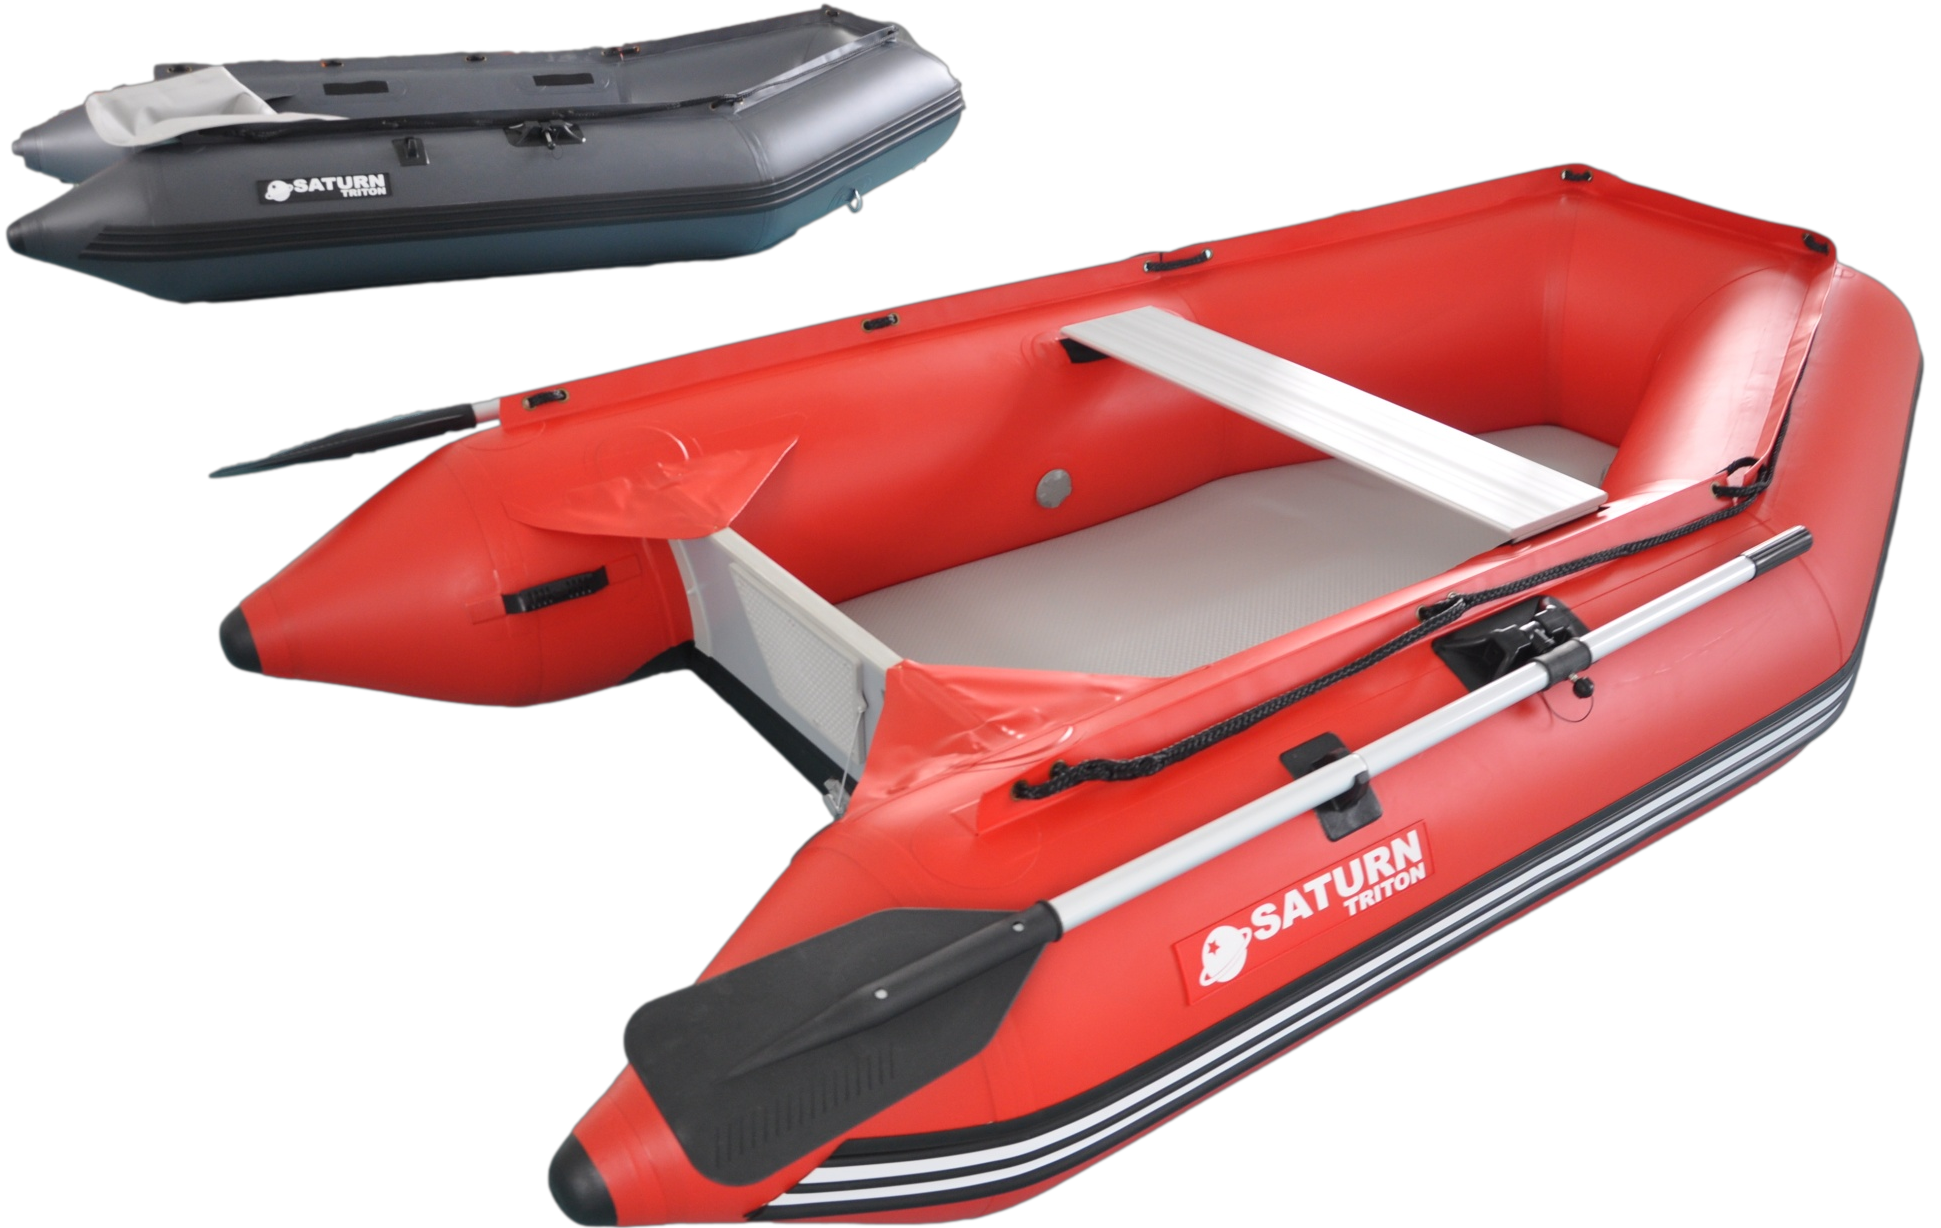 2023 8'6" Saturn Triton (TR260) Inflatable Boats - Red and Dark Grey